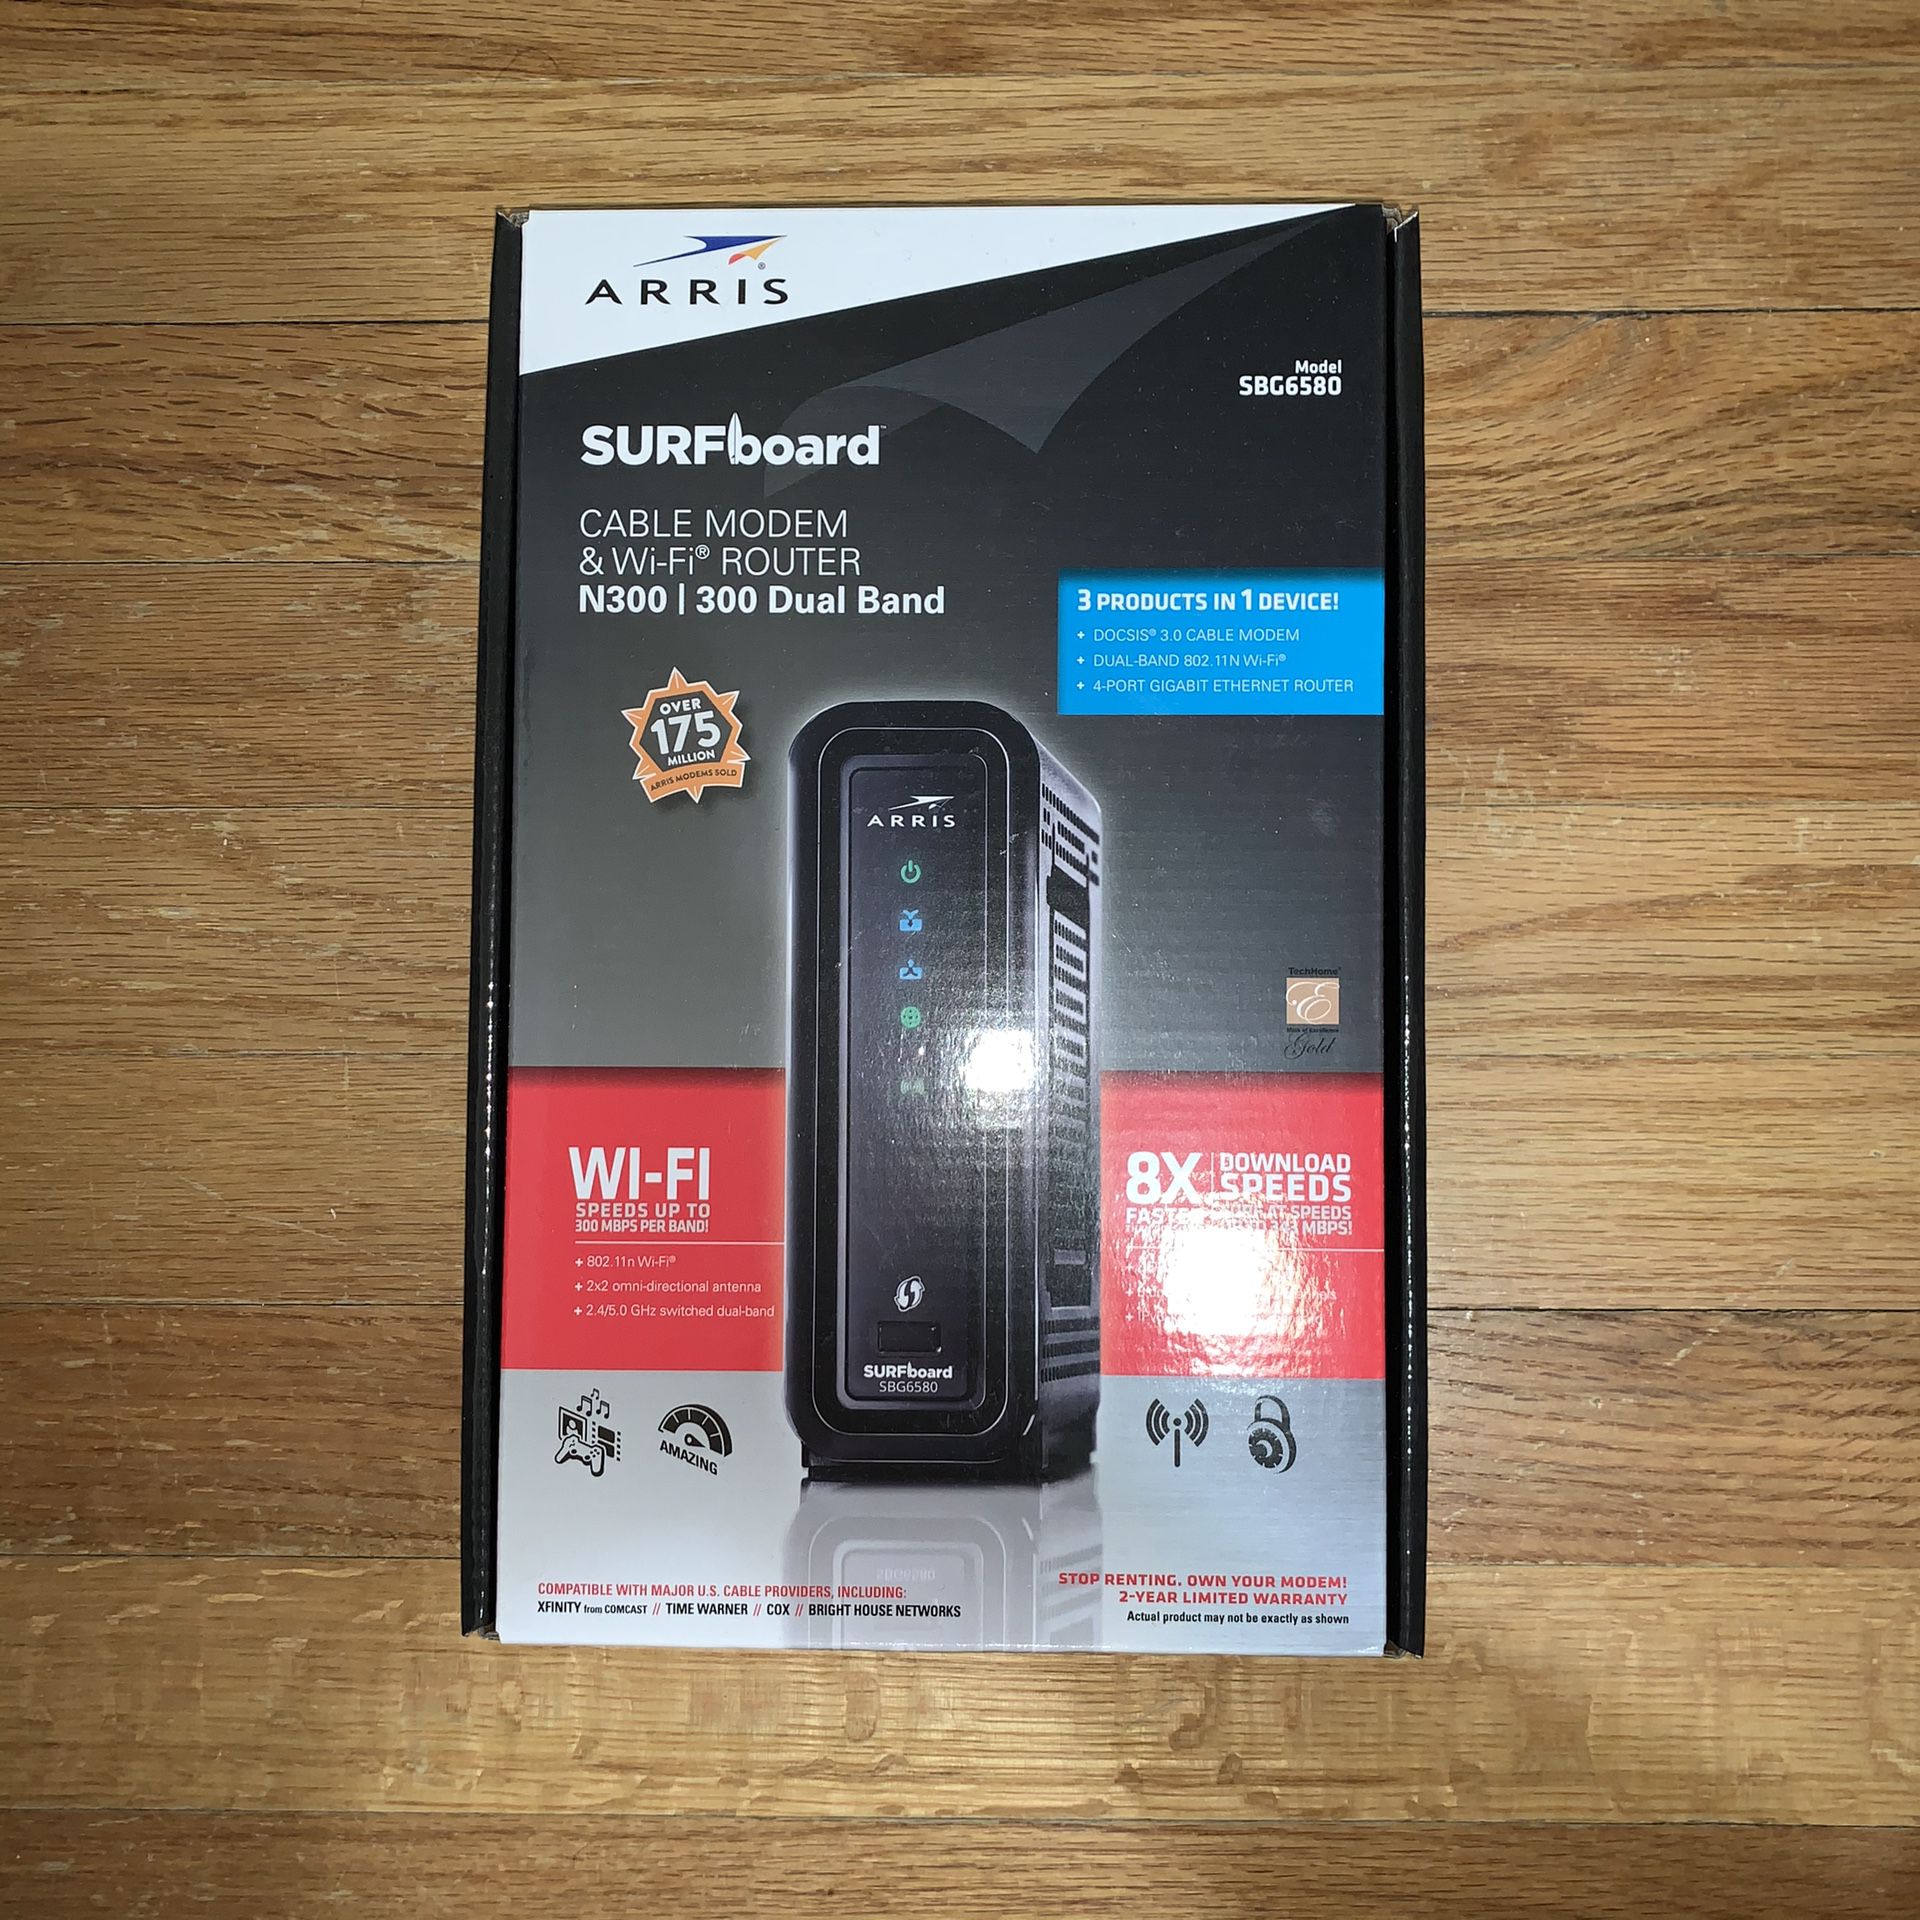 Arris SURFboard Cable Modem & Wi-Fi Router